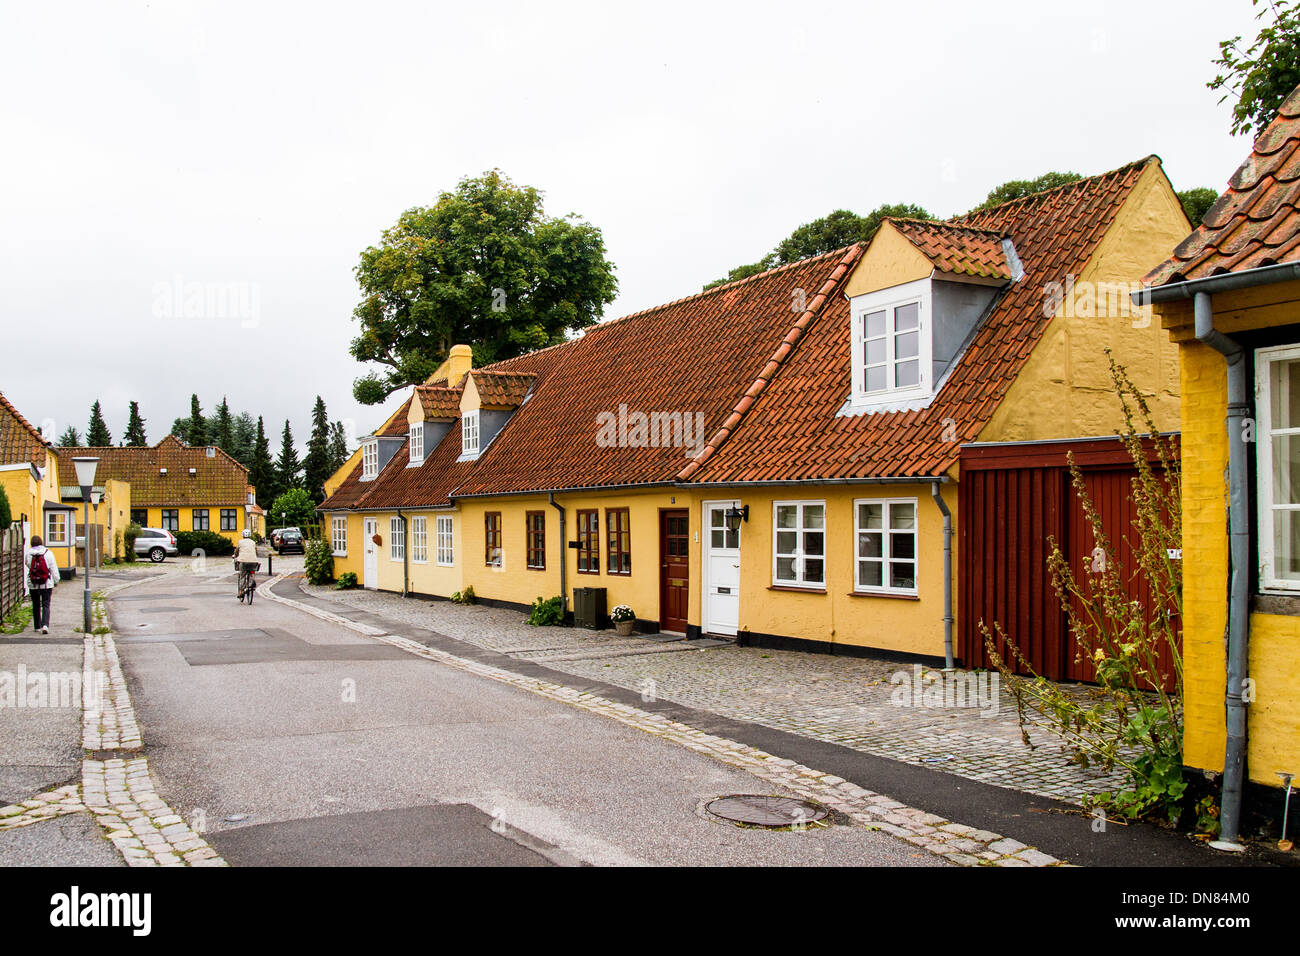 A village street in the historic rural town of Maribo denmark Stock Photo